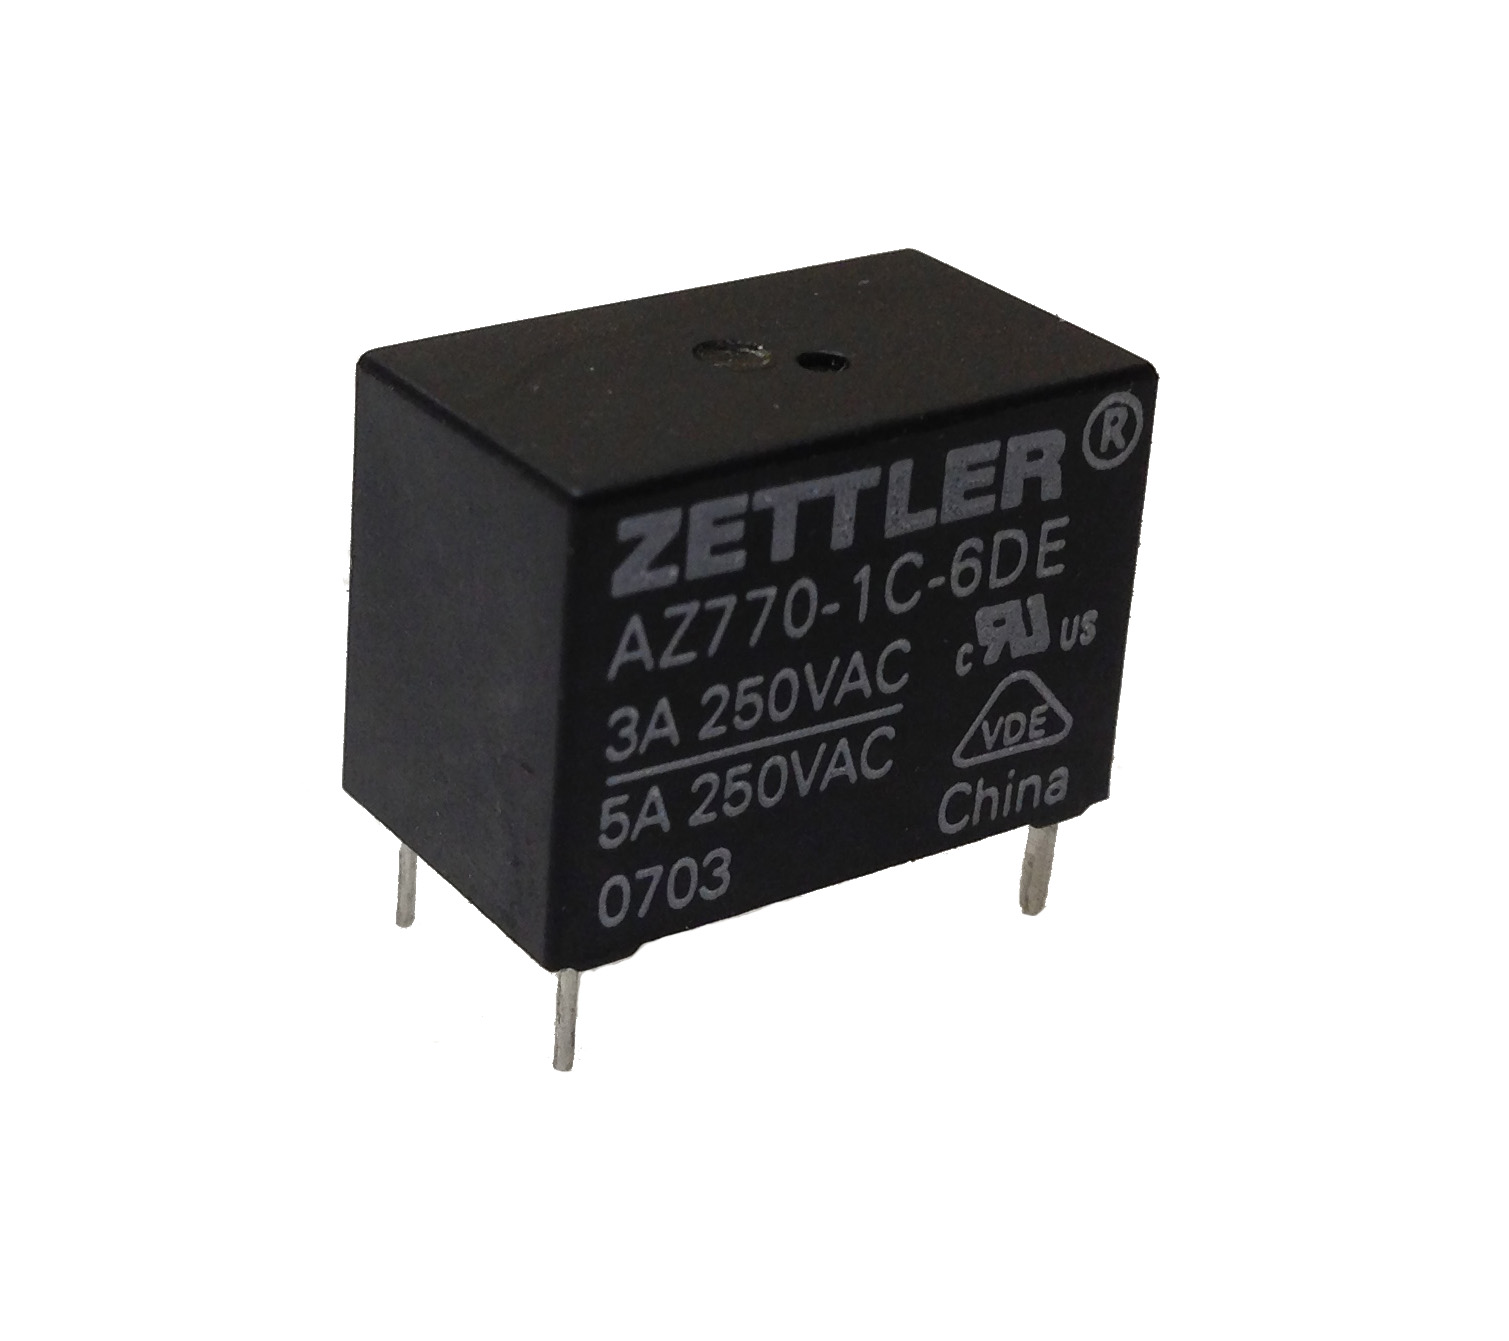 Appliance Relays Manufacturers and Factory - Buy Best Price 